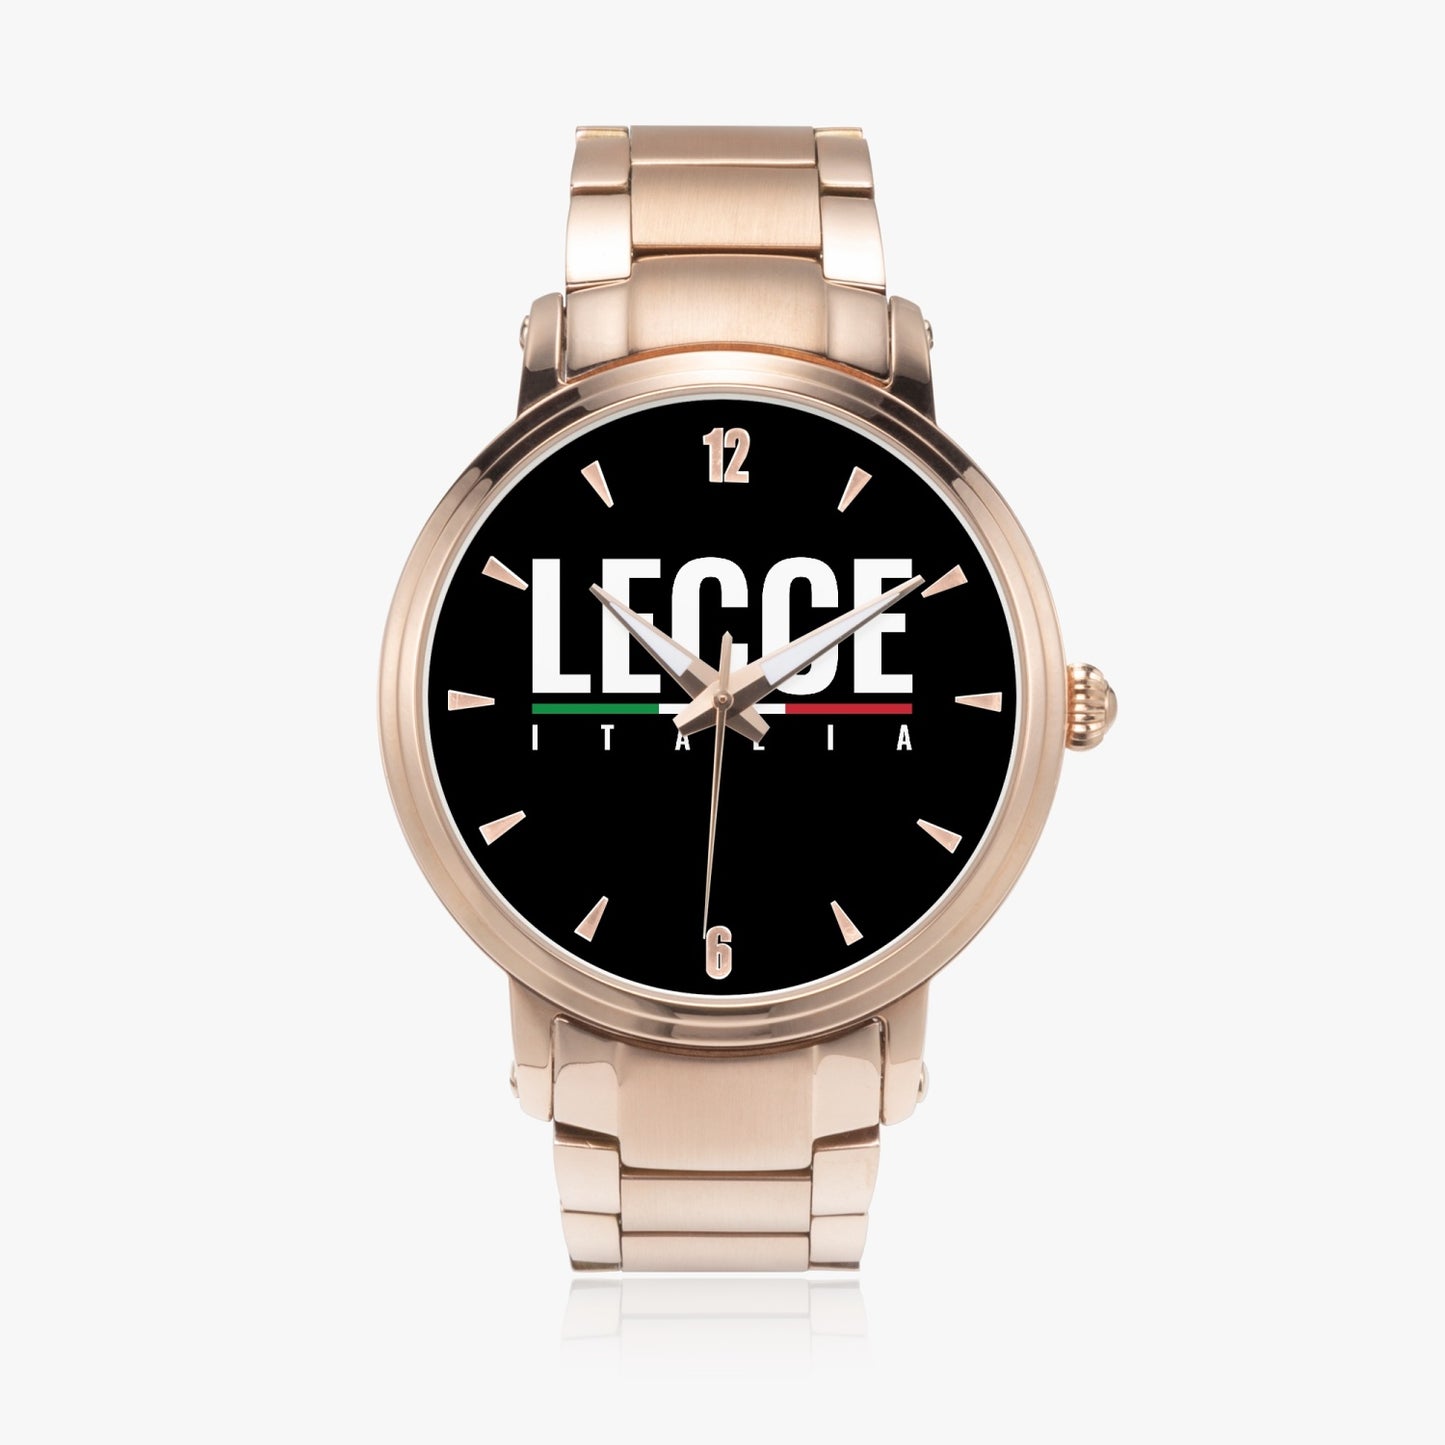 Lecce Italia Automatic Movement Watch - Premium Stainless Steel